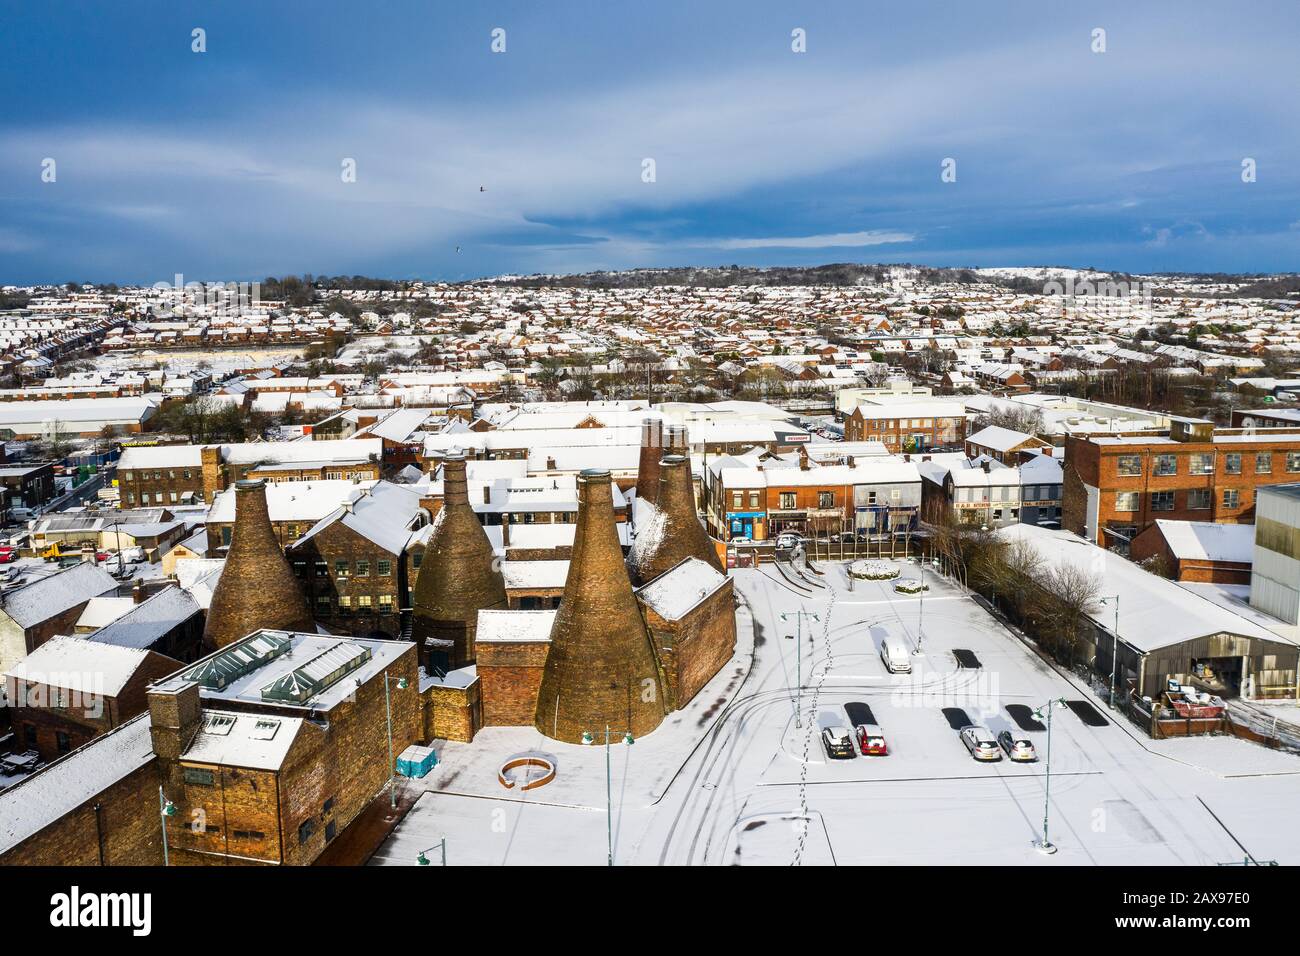 Aerial view of bottle kilns at Gladstone Pottery Museum, covered in snow on a cold winter day, Pottery manufacturing, snow in Stoke on Trent Stock Photo